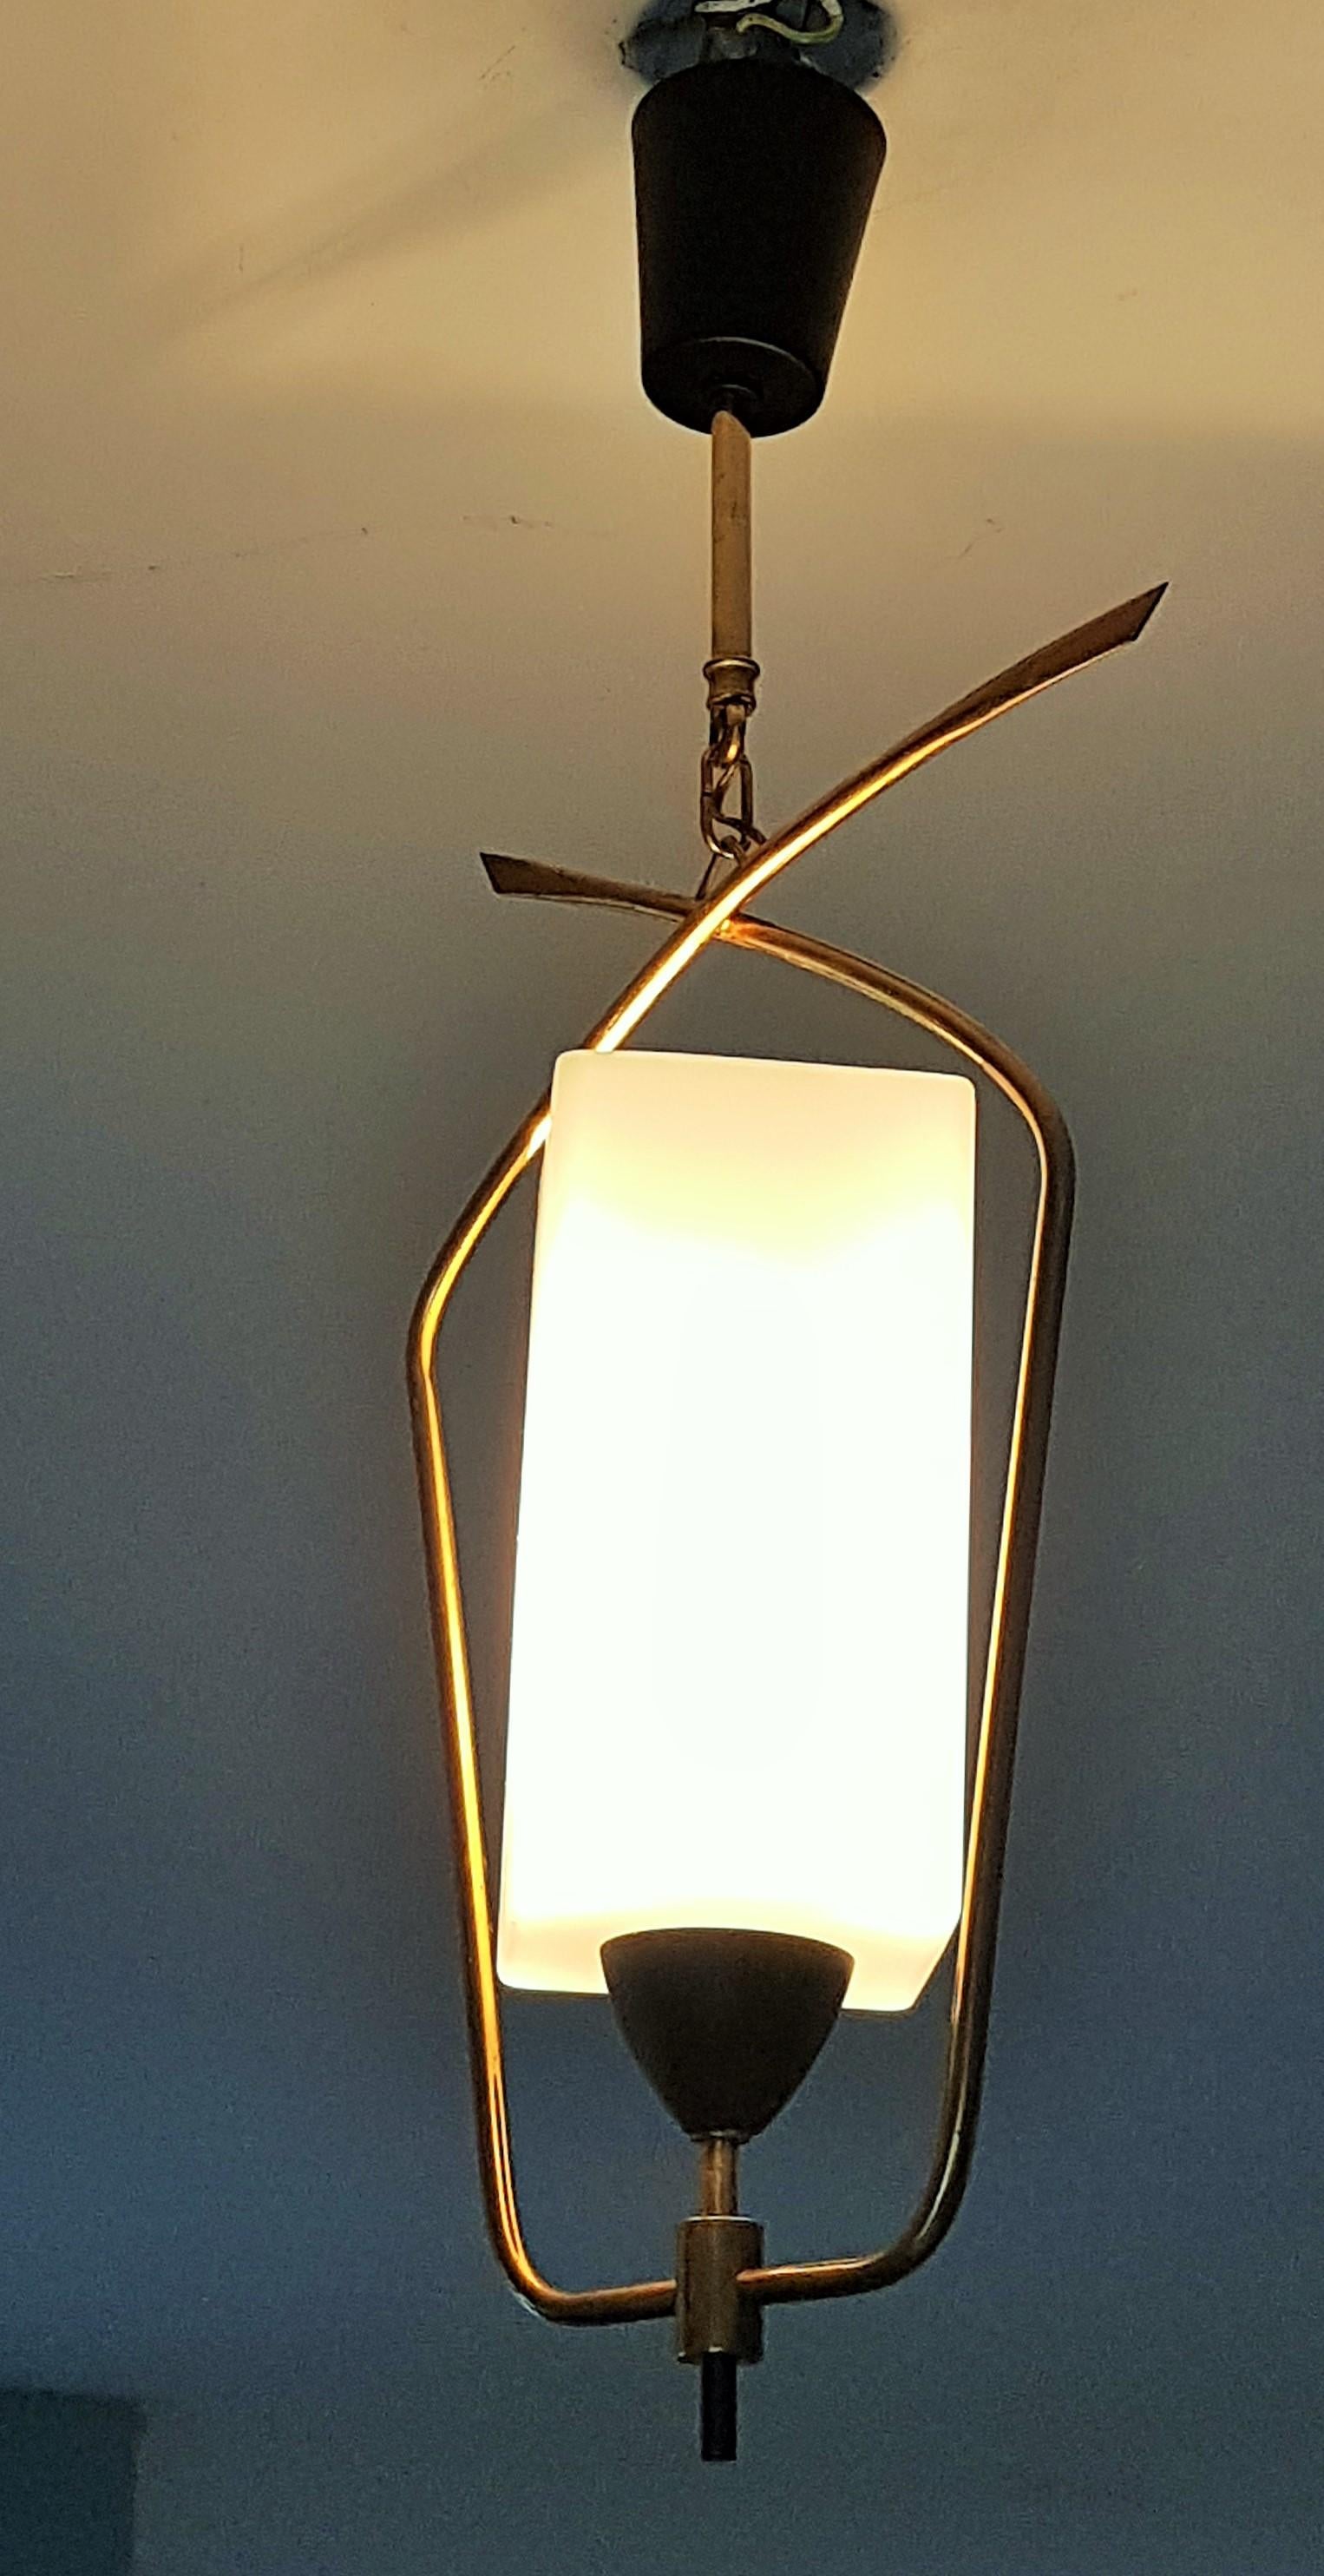 French Midcentury Brass and Glass Pendant Lantern by Arlus Lunel, France, 1950 For Sale